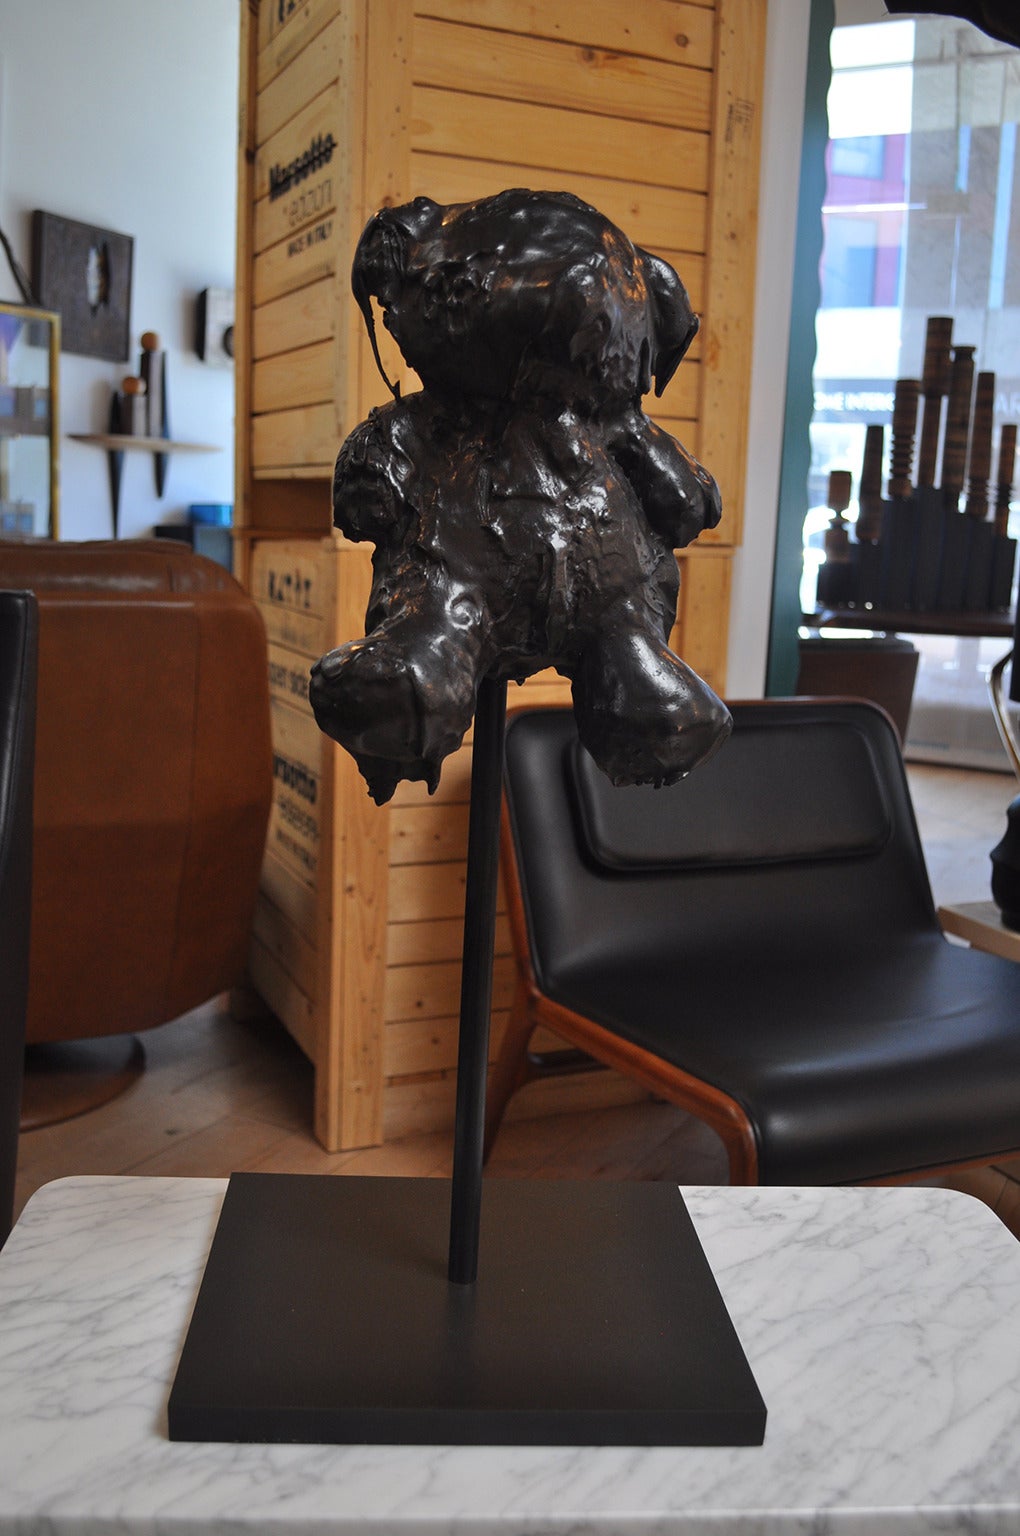 This whimsically morbid cast bronze sculpture is by Los Angeles artist Mattia Biagi. It emerged from a previous series of sculptures in which Biaggi immersed found teddybears in tar. The sculpture, part of an open edition, is mounted on a metal base.